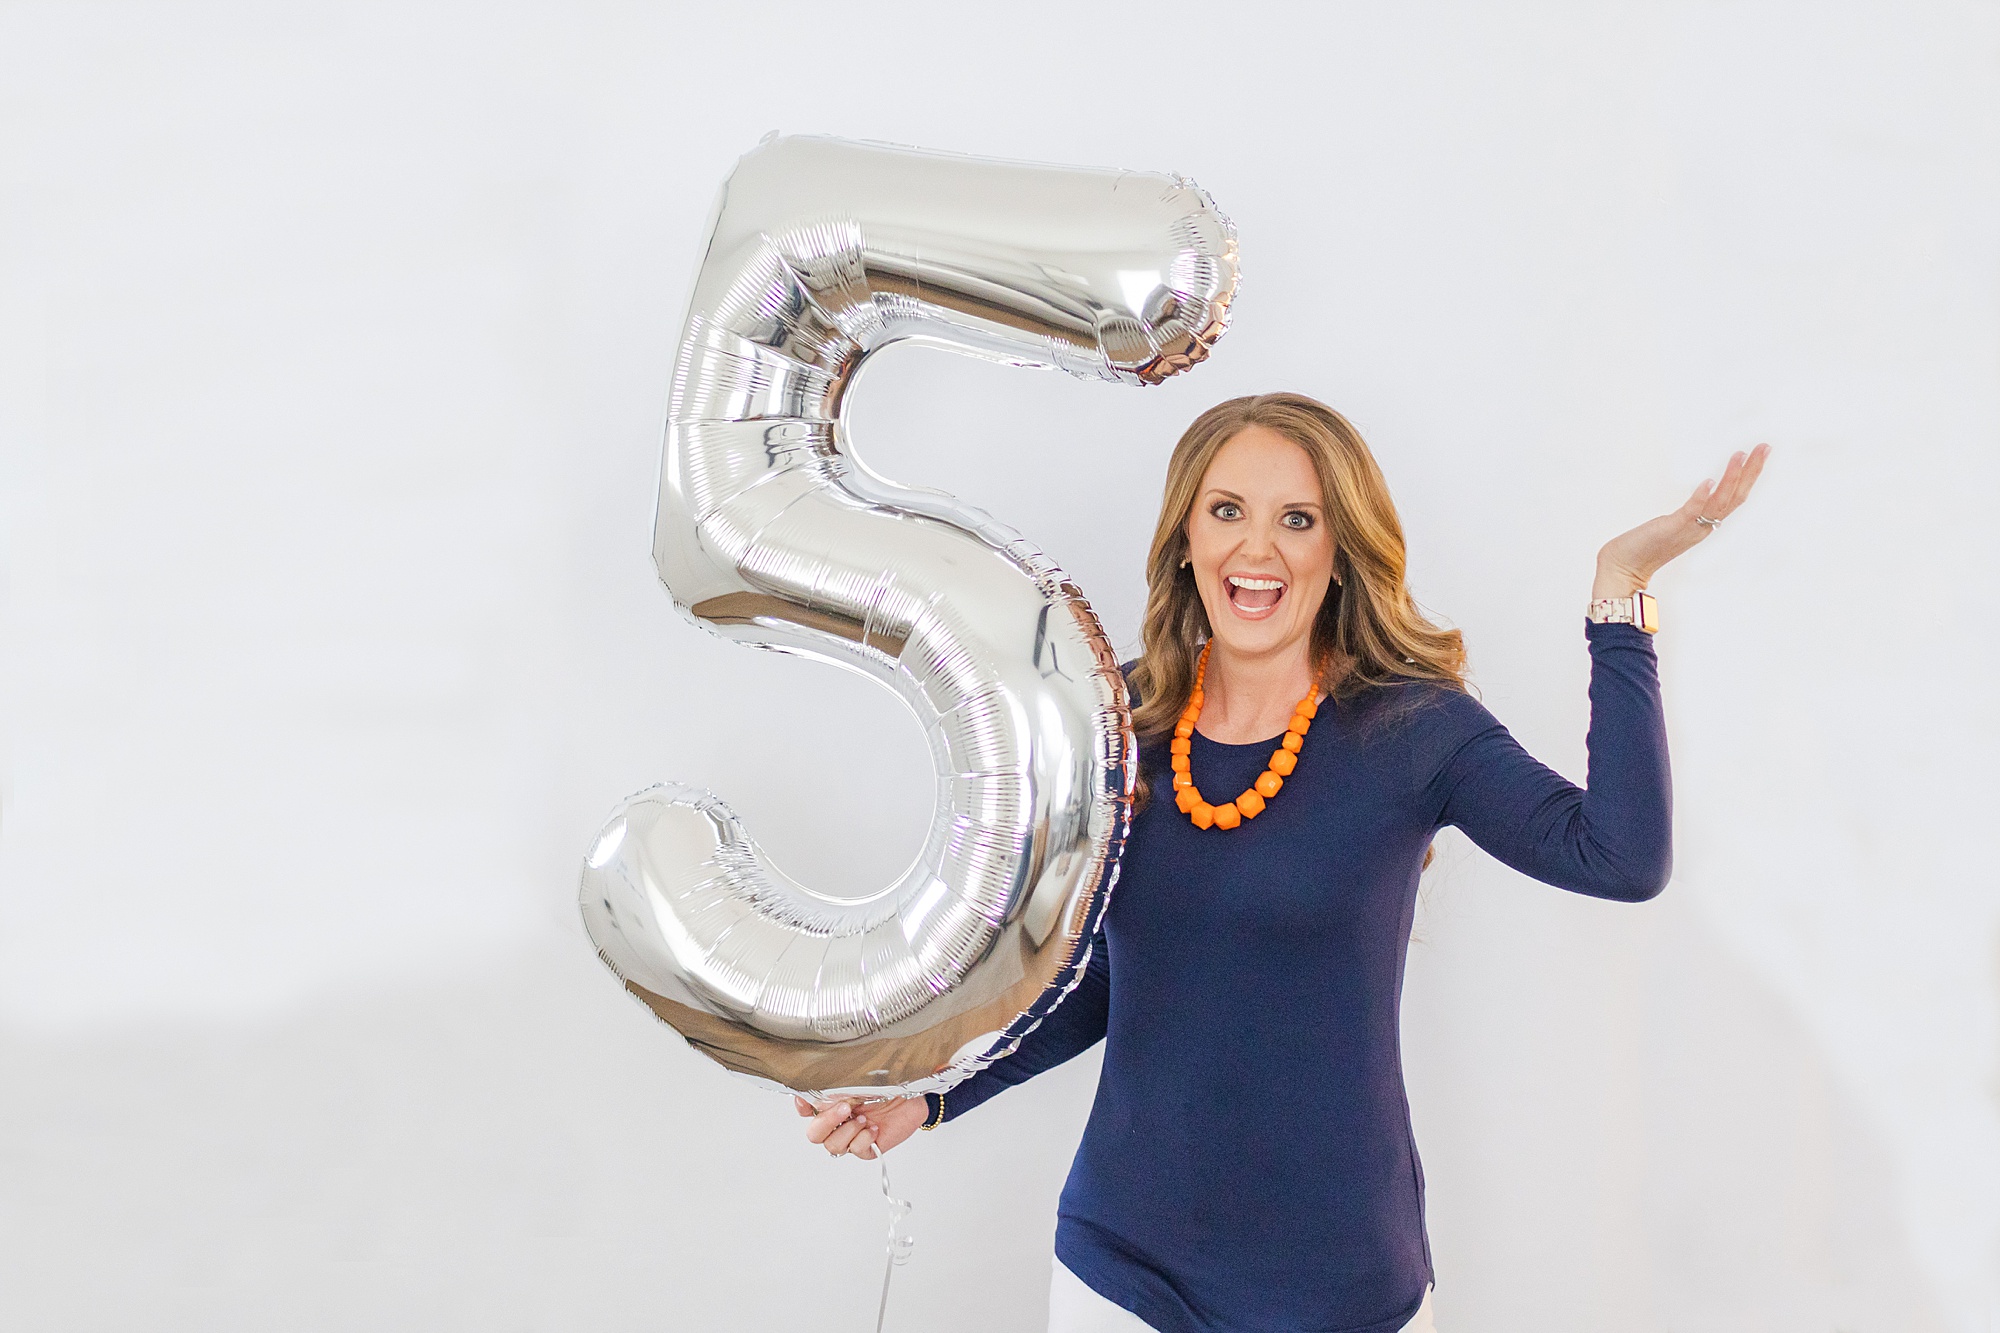 woman holds "5" balloon during branding photos